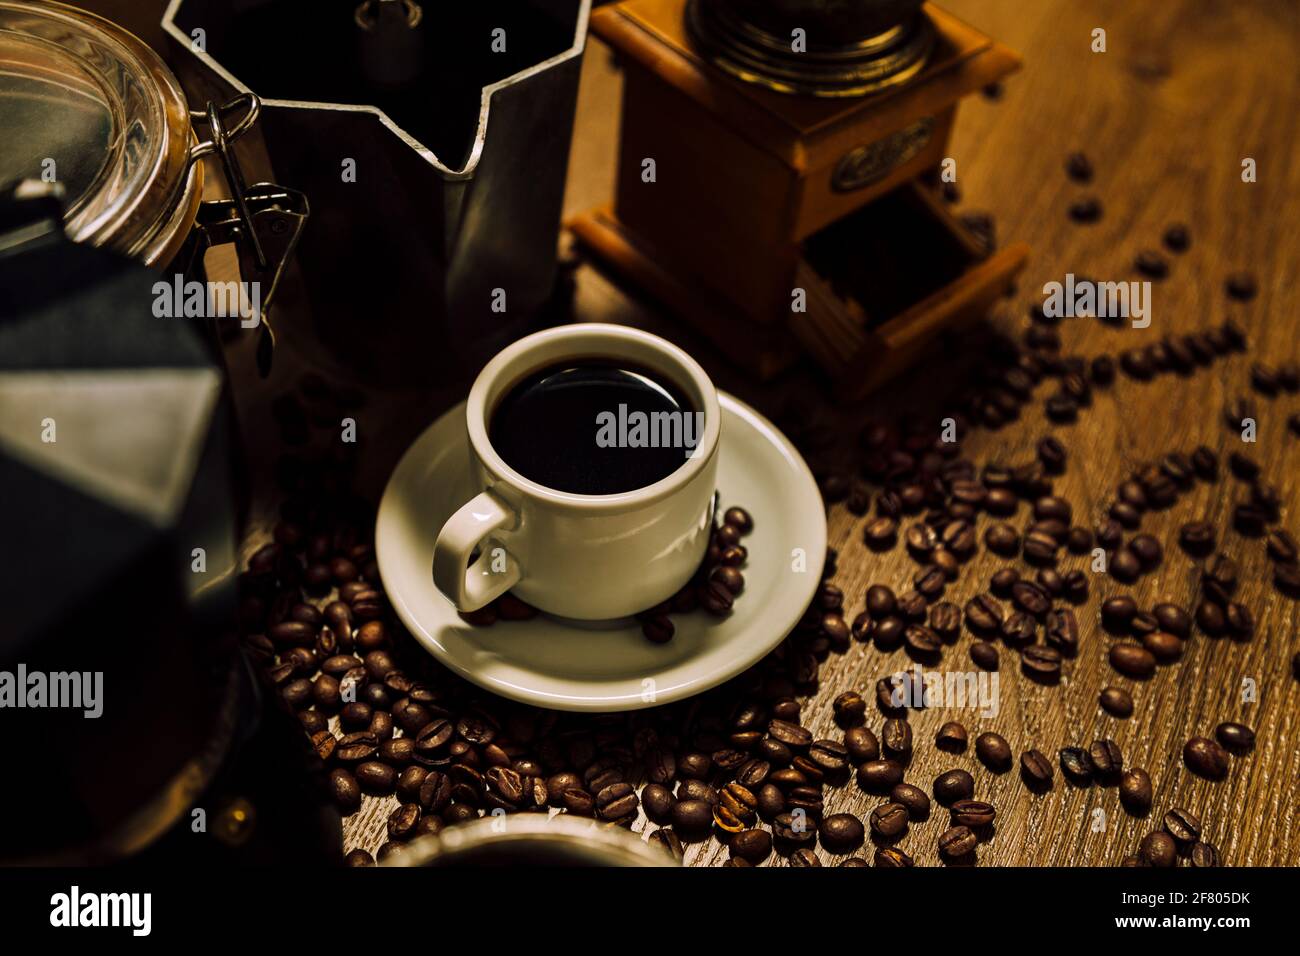 https://c8.alamy.com/comp/2F805DK/coffee-stuff-a-white-cup-with-black-coffee-italian-coffee-maker-moka-a-mill-and-grains-over-a-wooden-table-vintage-rustic-style-2F805DK.jpg